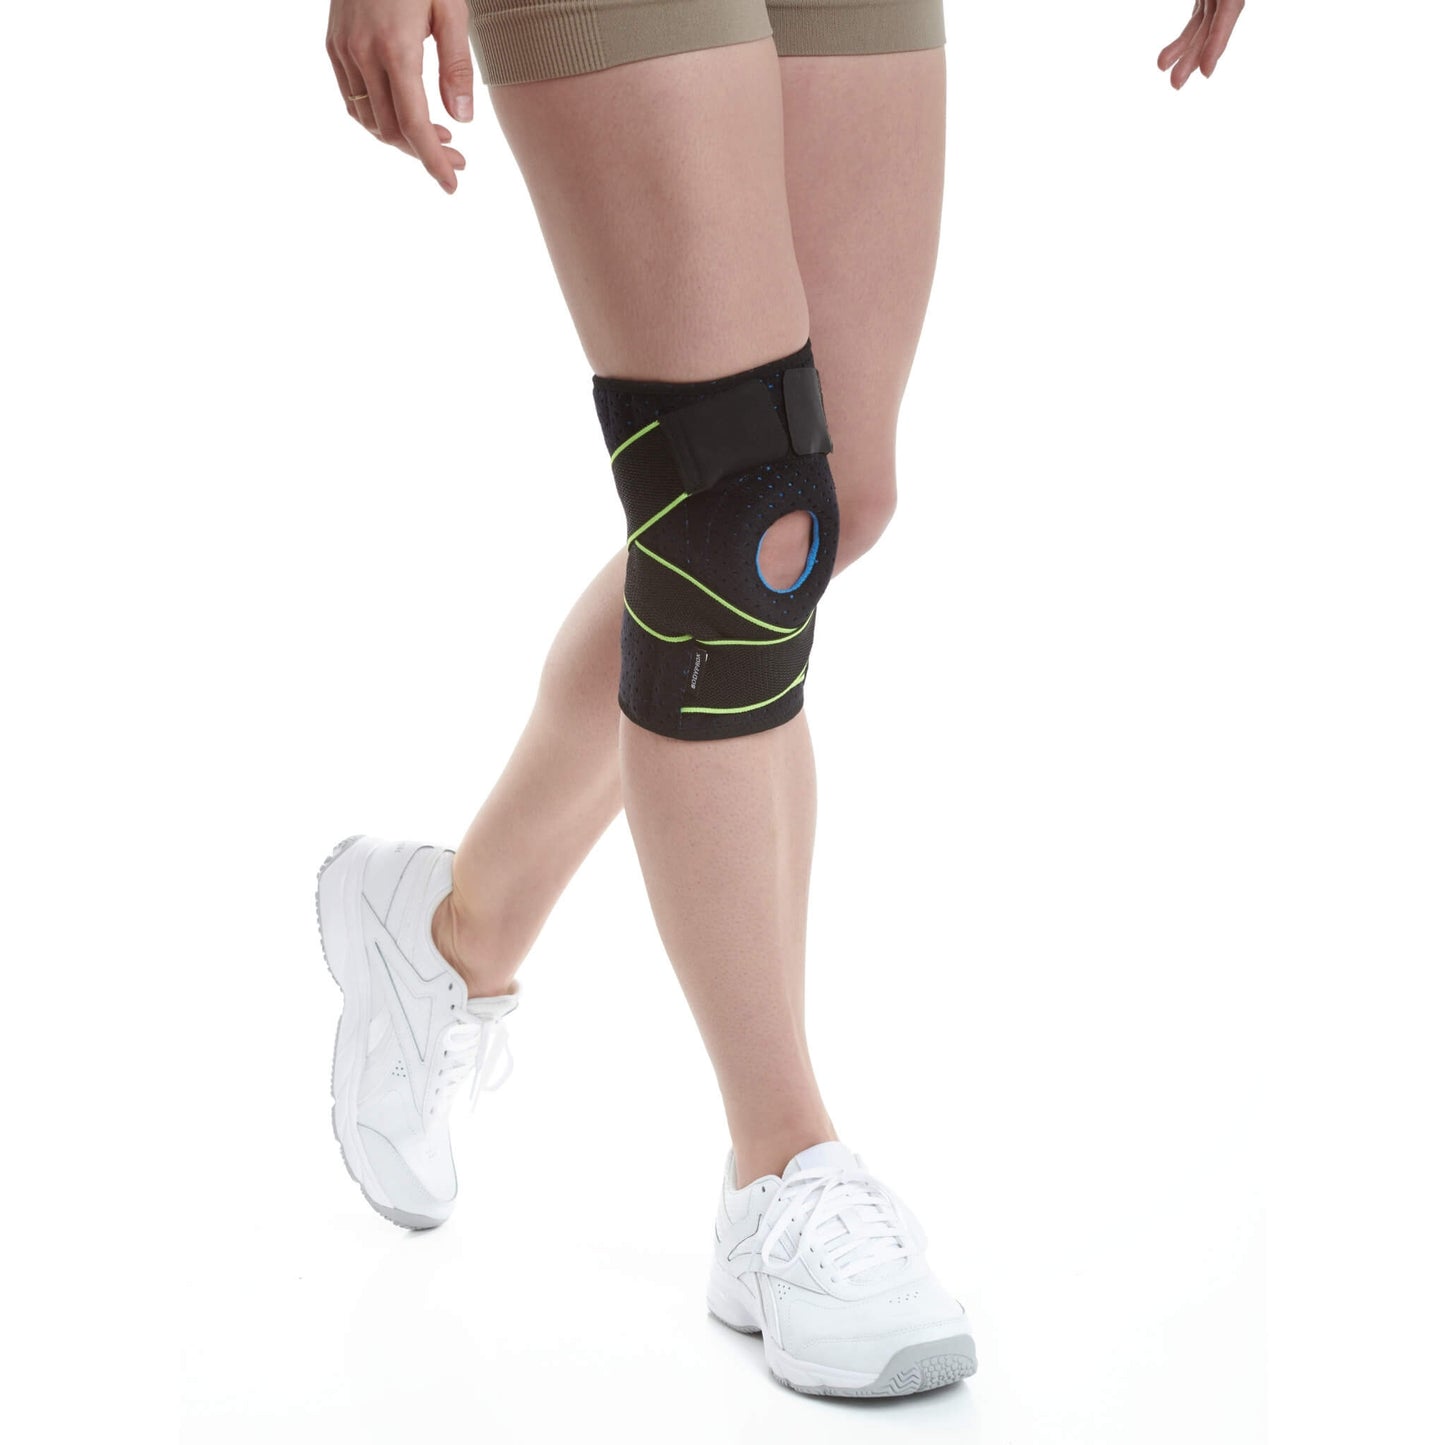 Knee Brace with Stabilizers and Patella Gel Pad